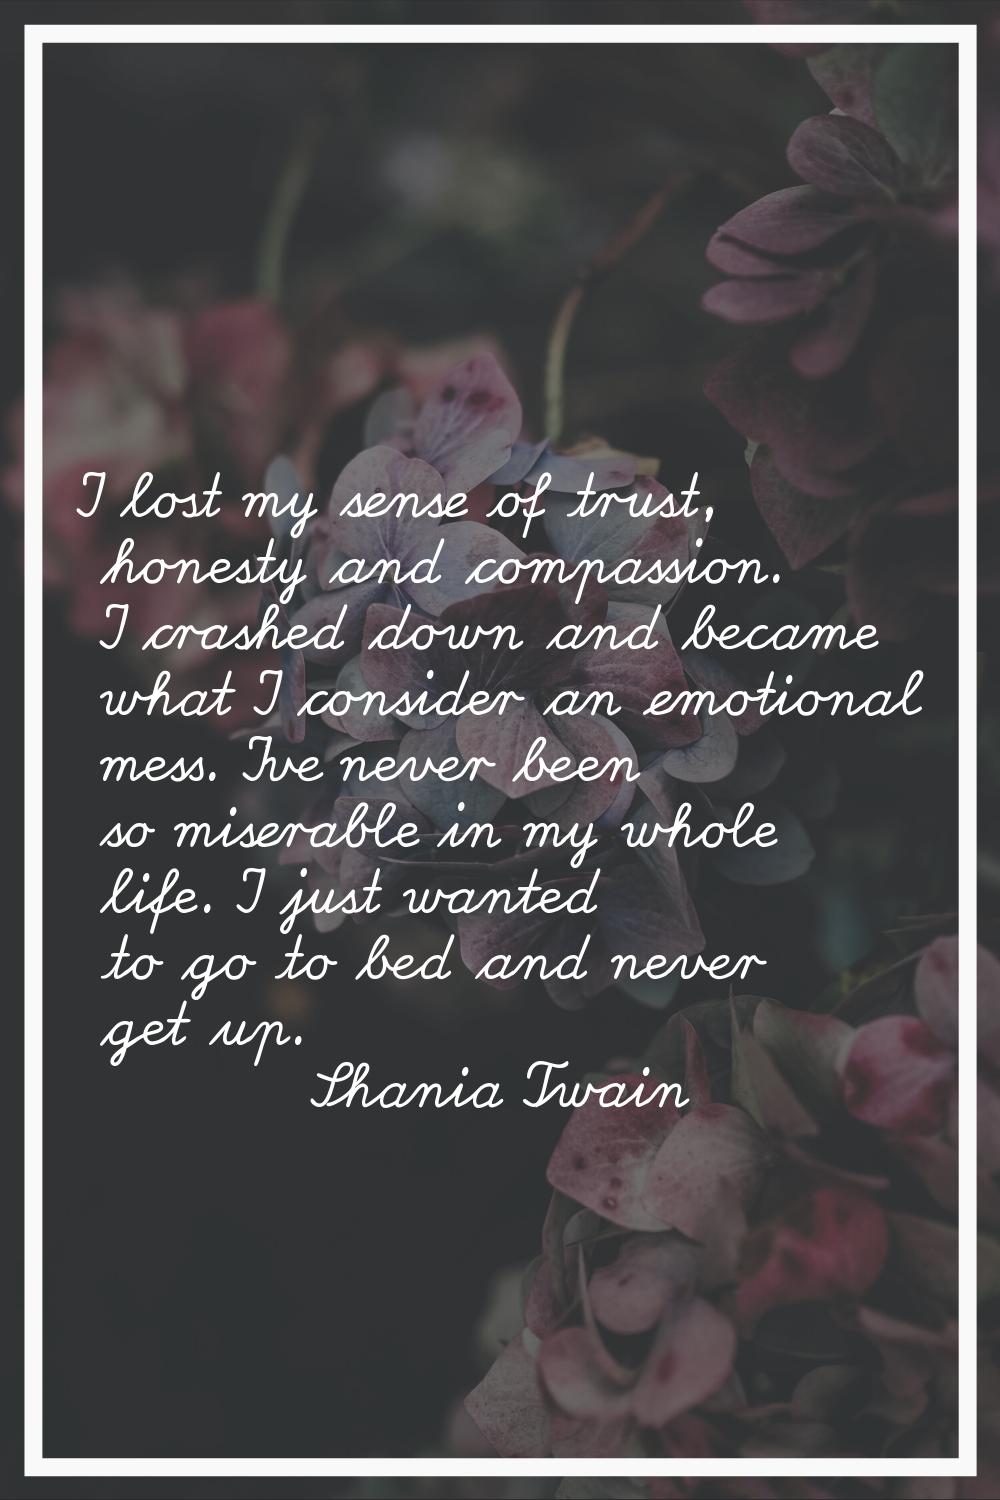 I lost my sense of trust, honesty and compassion. I crashed down and became what I consider an emot